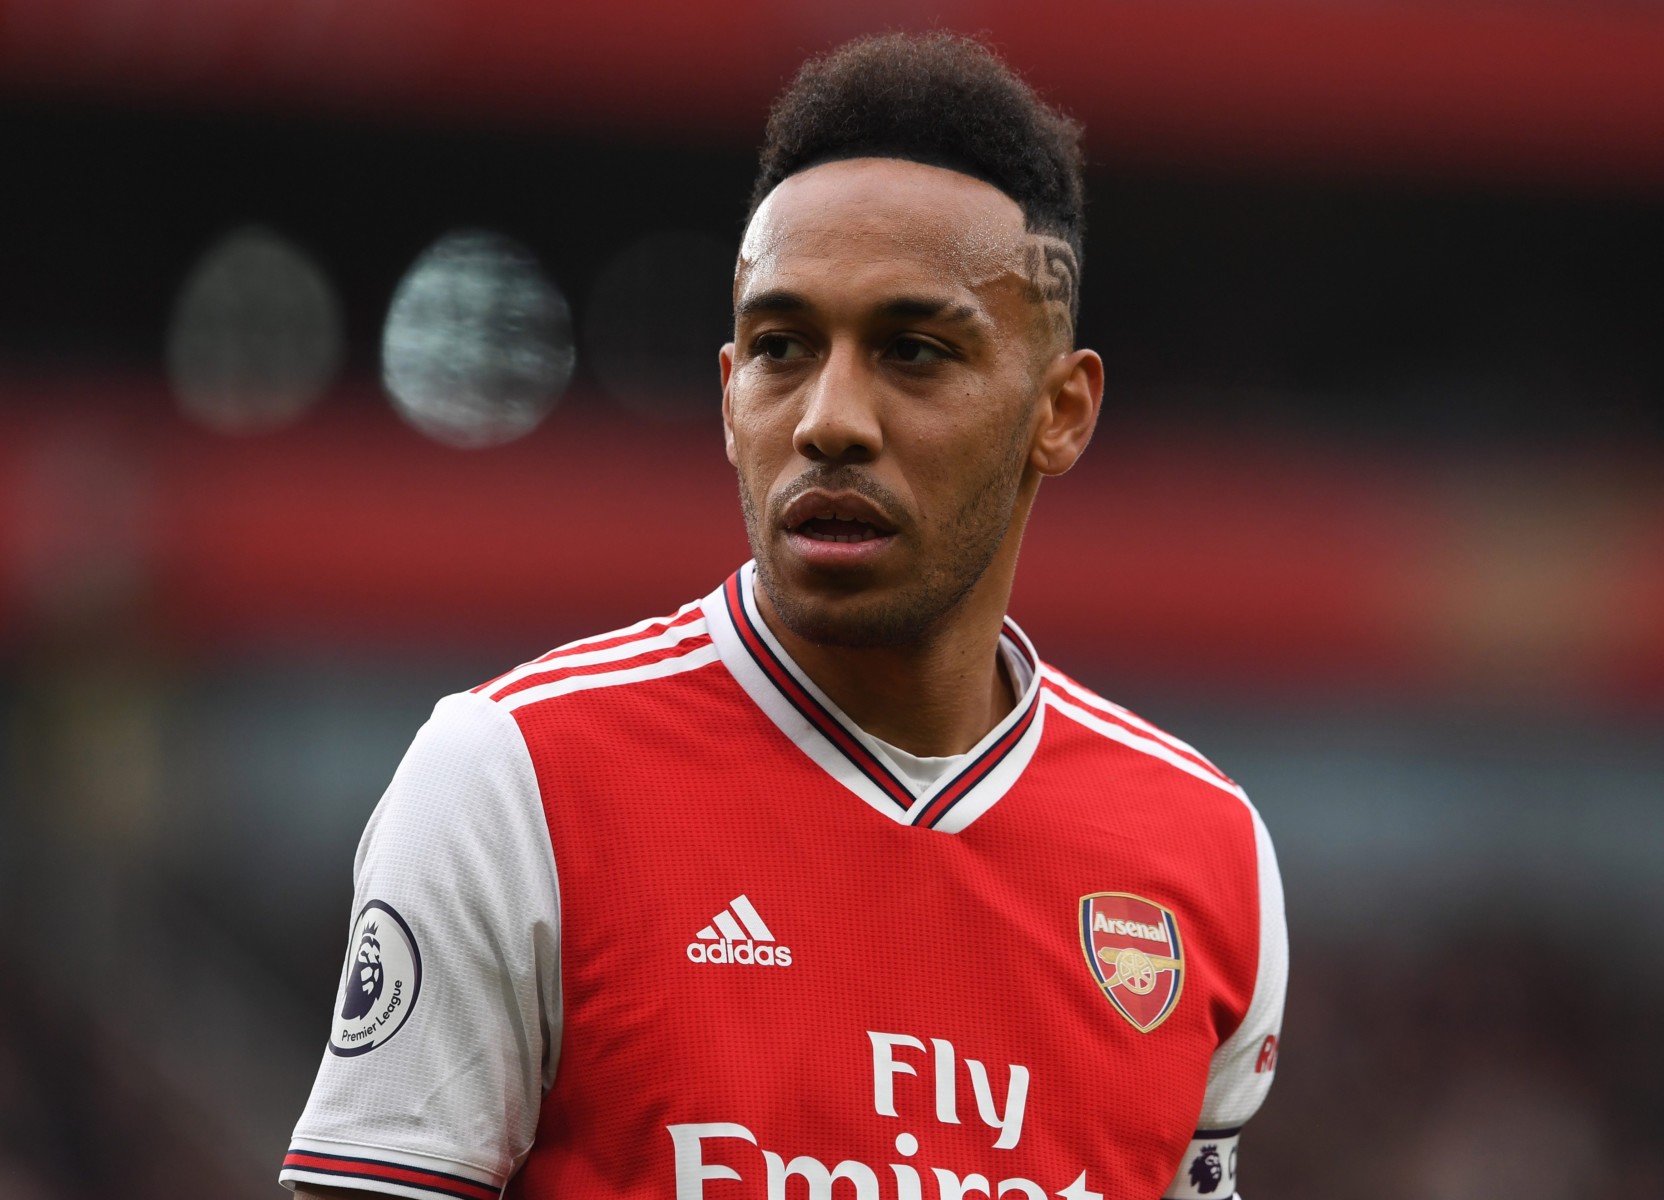 , Arsenal ‘pull out’ of contract negotiations with Aubameyang after months of talks amid Man Utd transfer interest